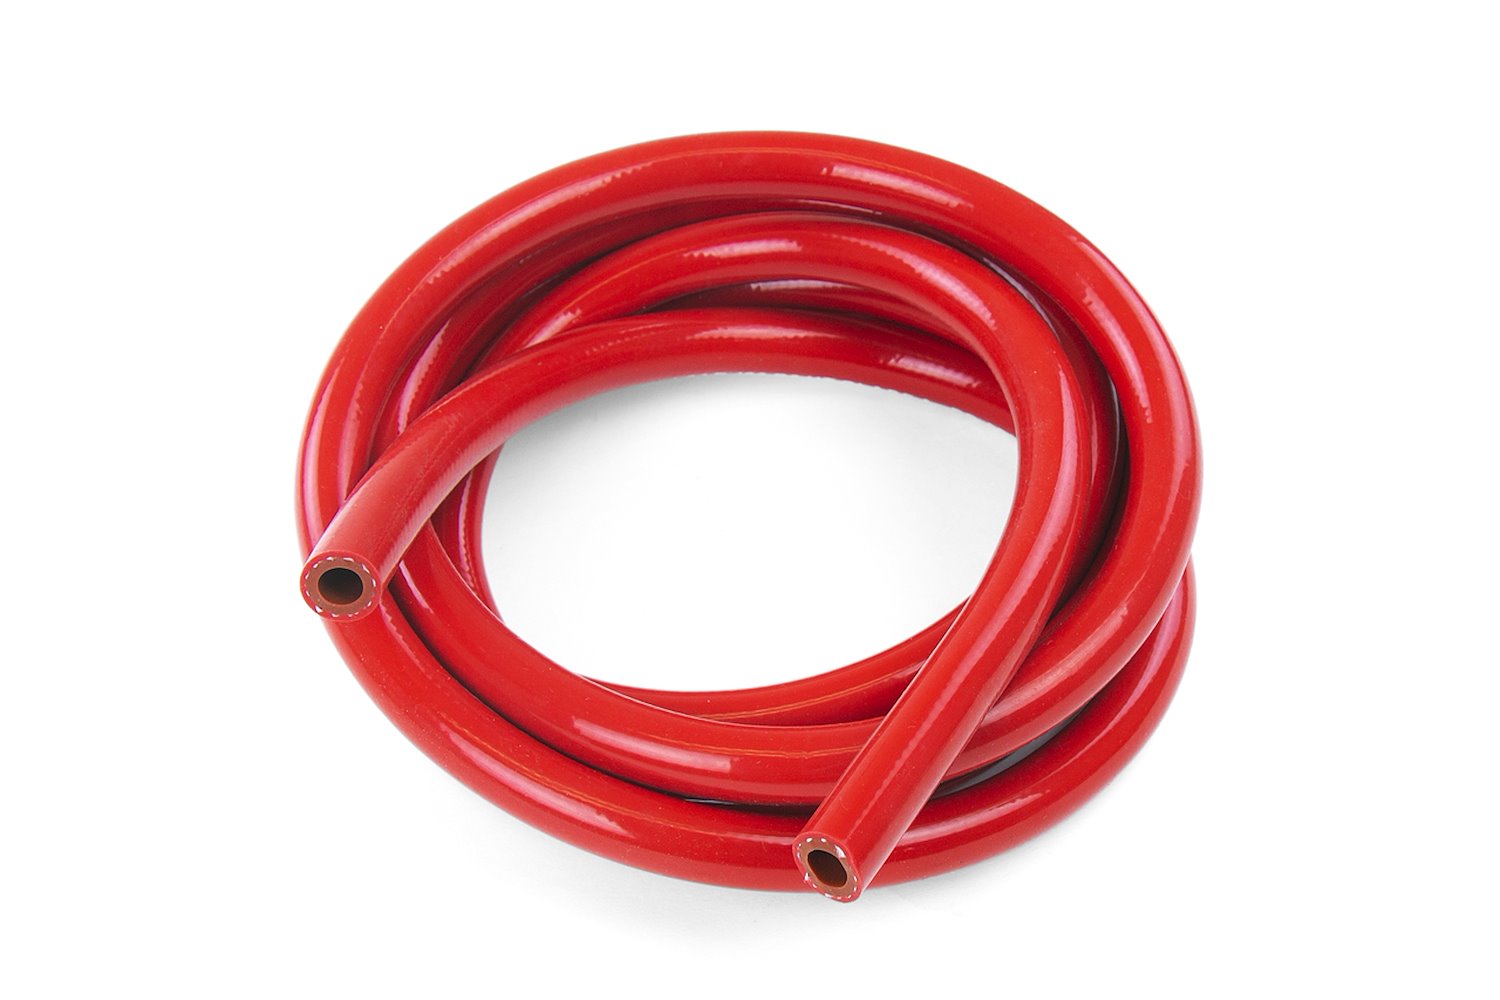 HTHH-013-REDx10 Silicone Heater Hose Tubing, High-Temp Reinforced, 1/8 in. ID, 10 ft. Roll, Red